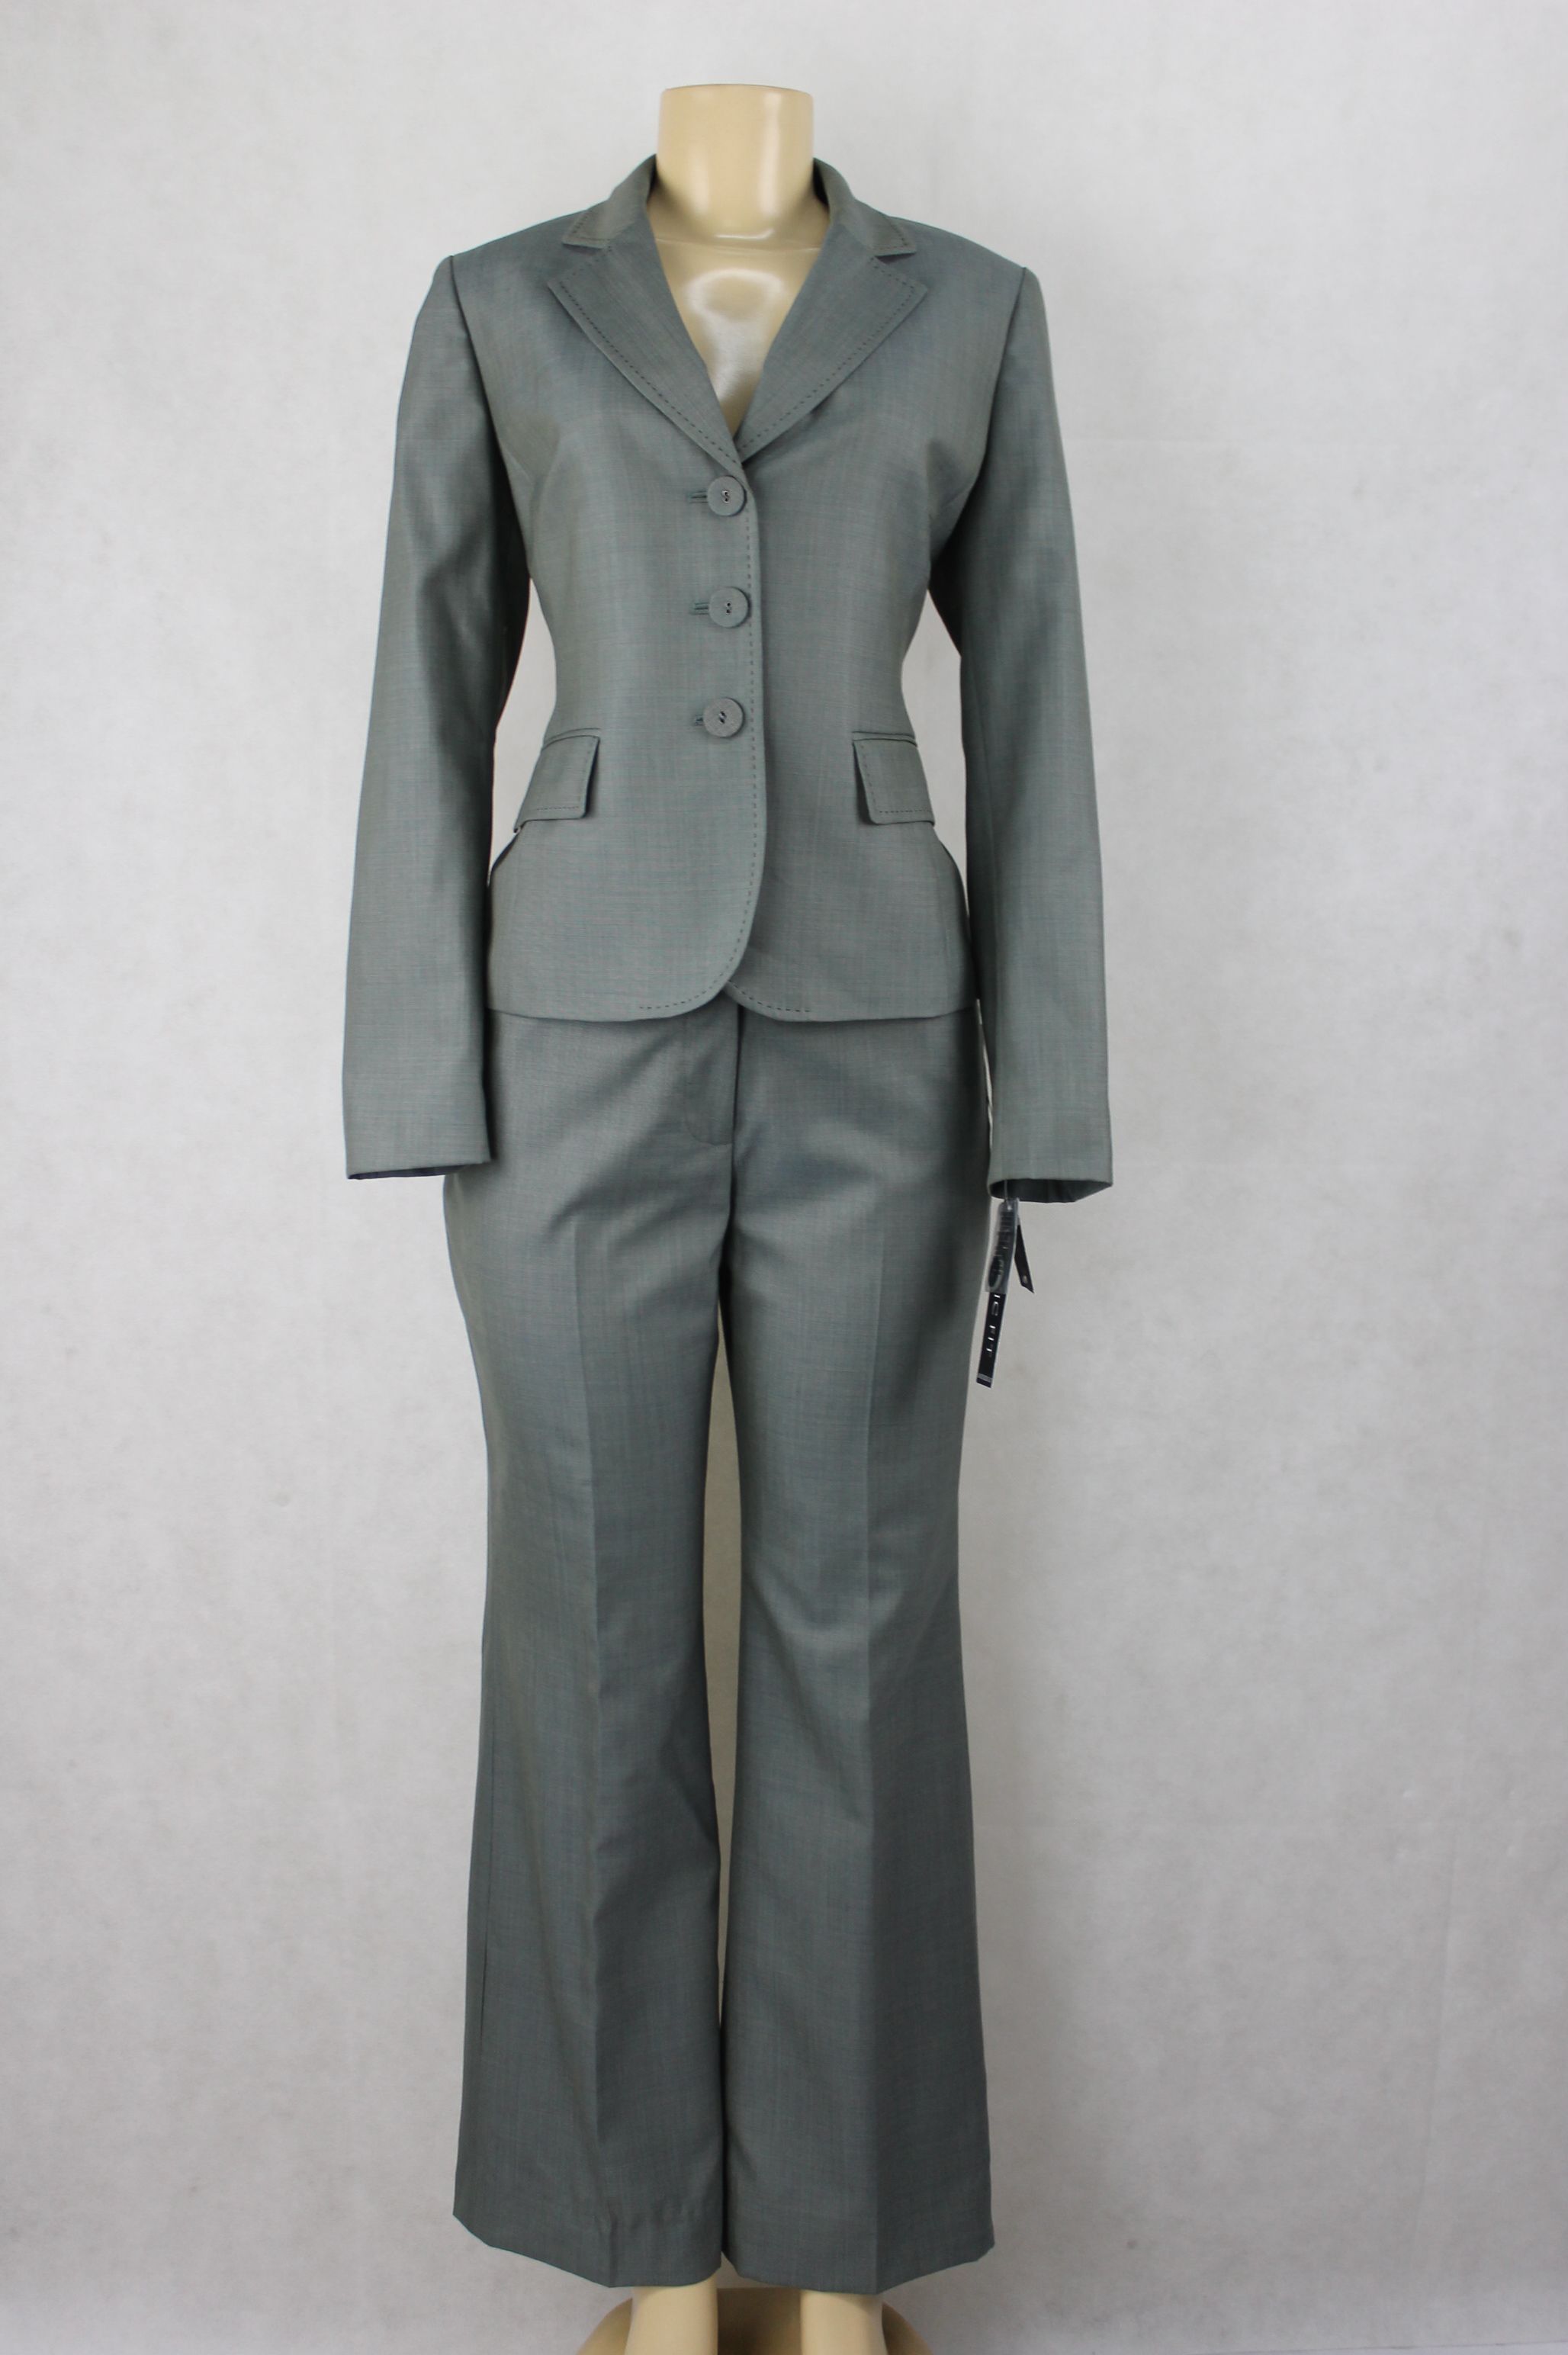 onsale for $ 89 99 new with tags anne klein women suit mykonos jacket 